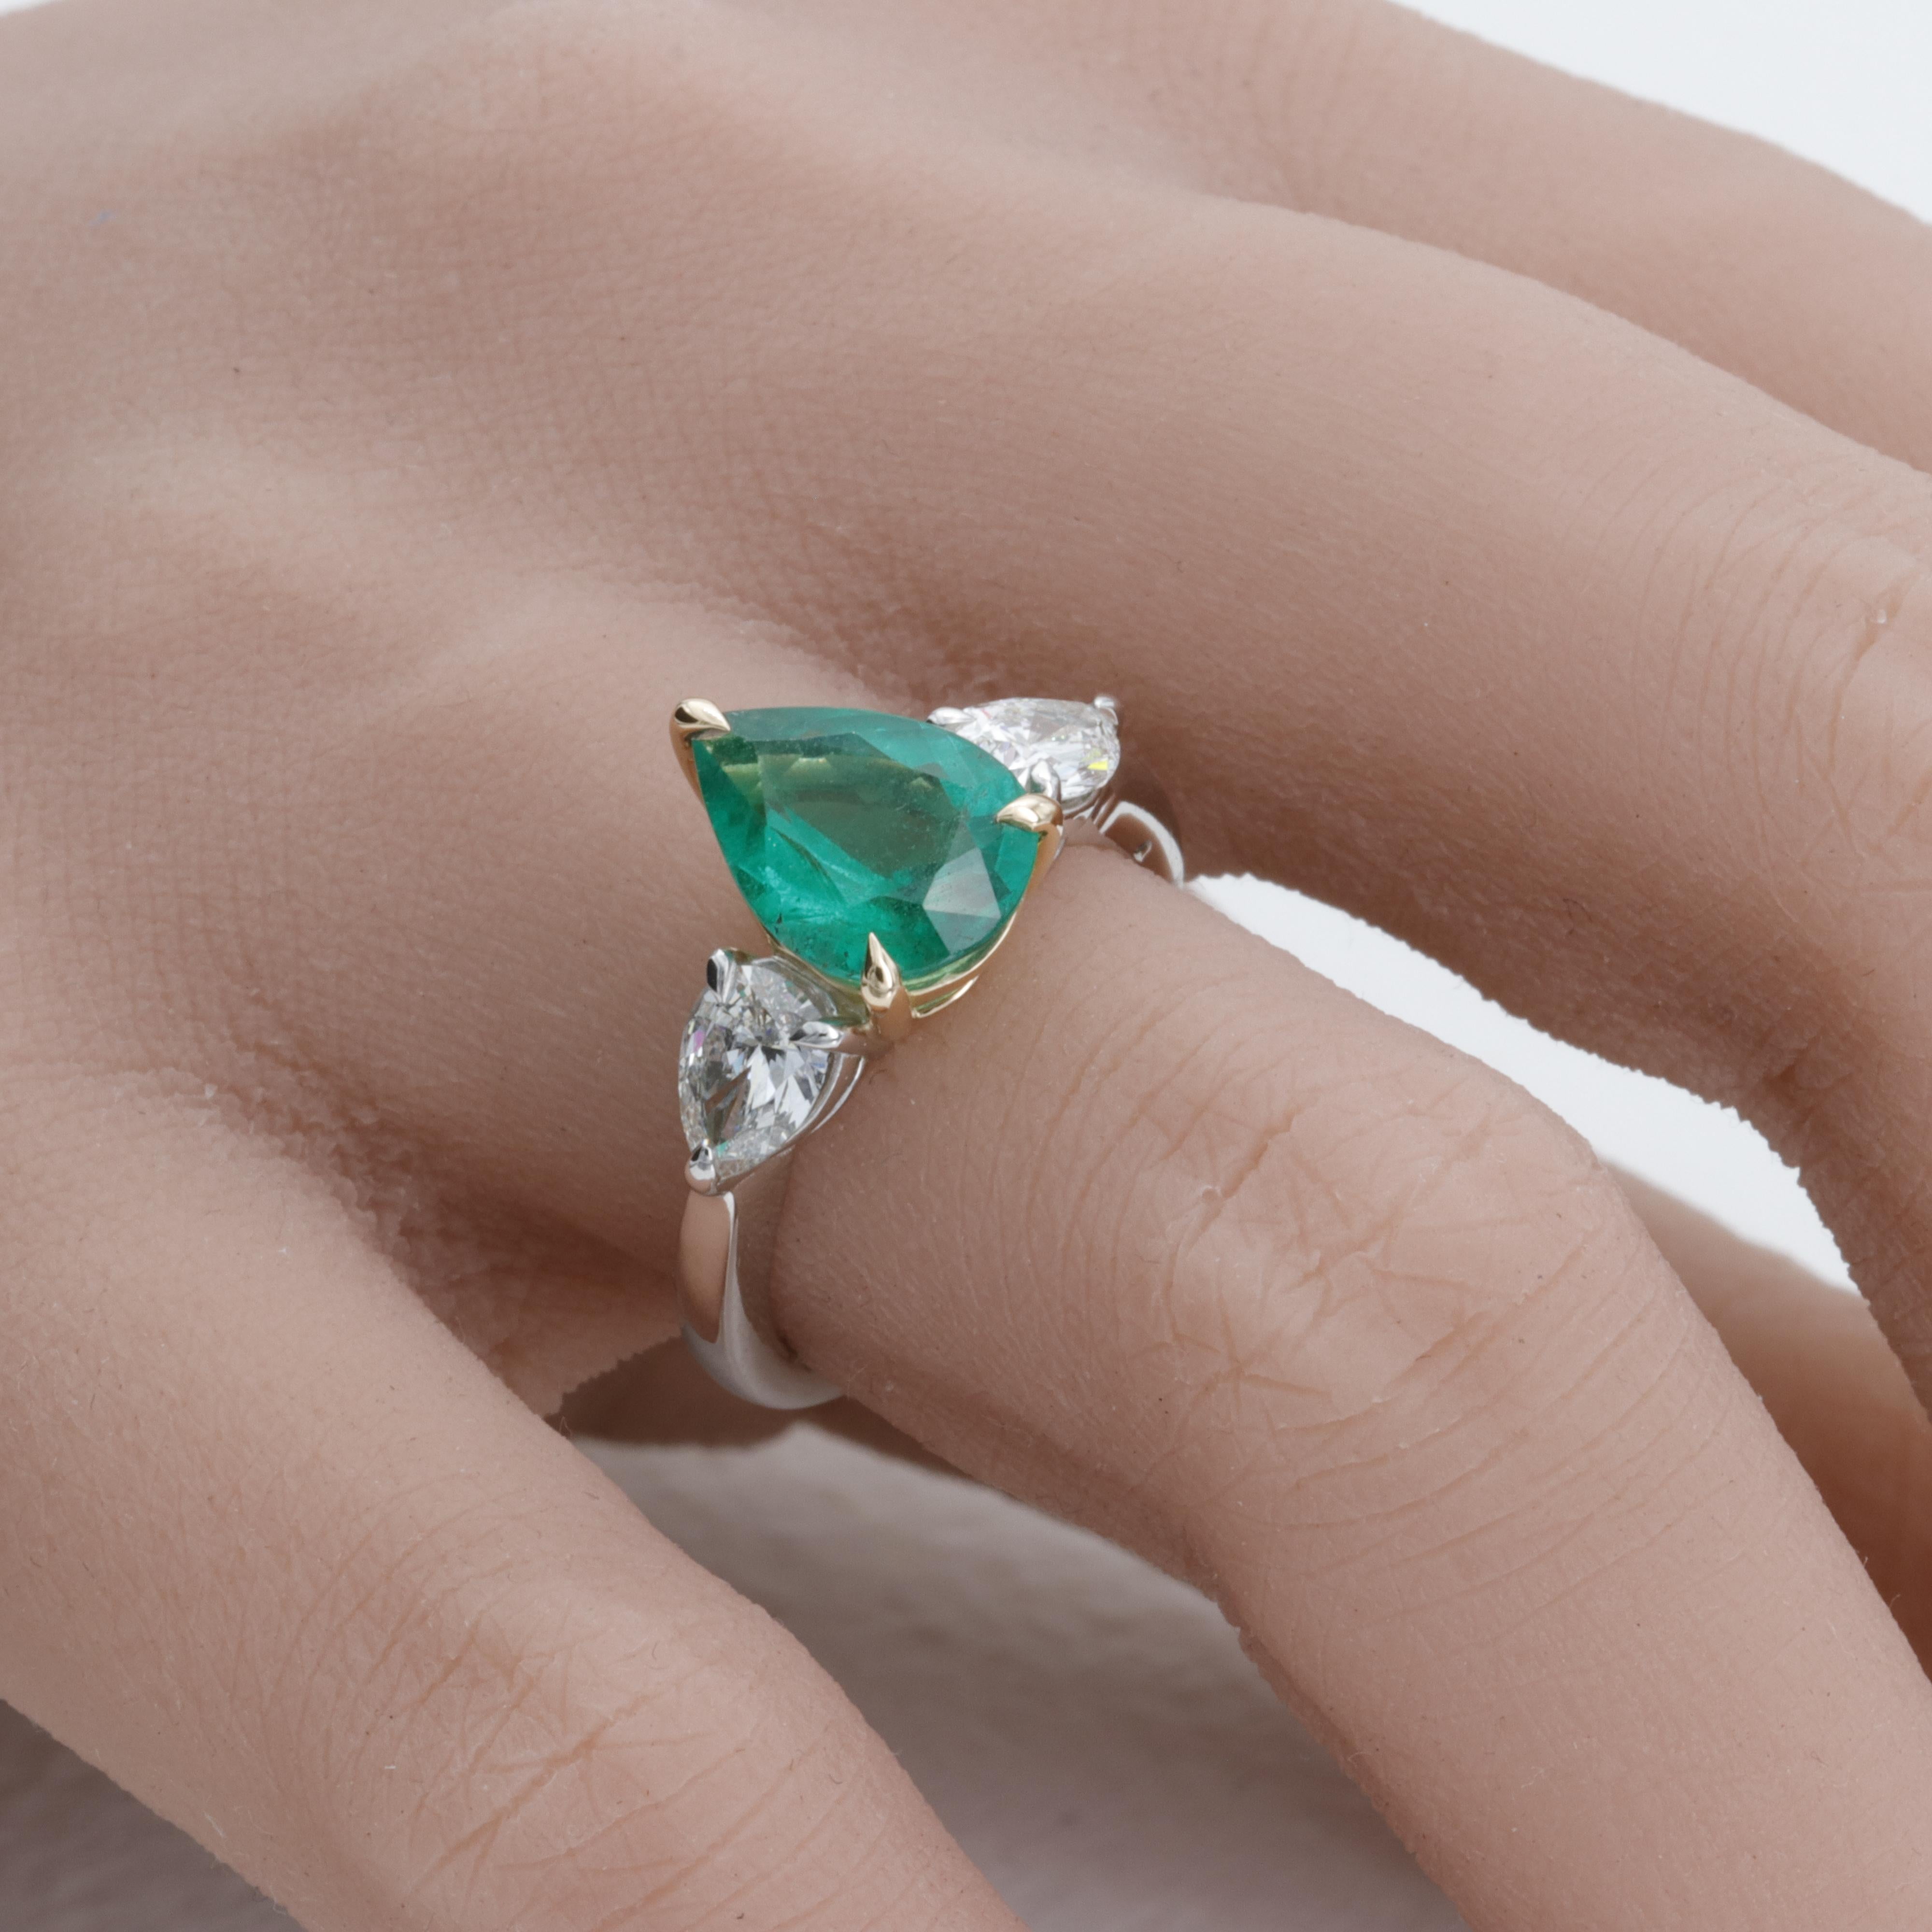 This unworn three stone ring features an exceptional pear shape emerald weighing 2.26 carats expertly set in platinum and 18 karat yellow gold and flanked by 2 excellent cut pear shape diamonds of fine quality weighing 0.97 carats. 

The emerald